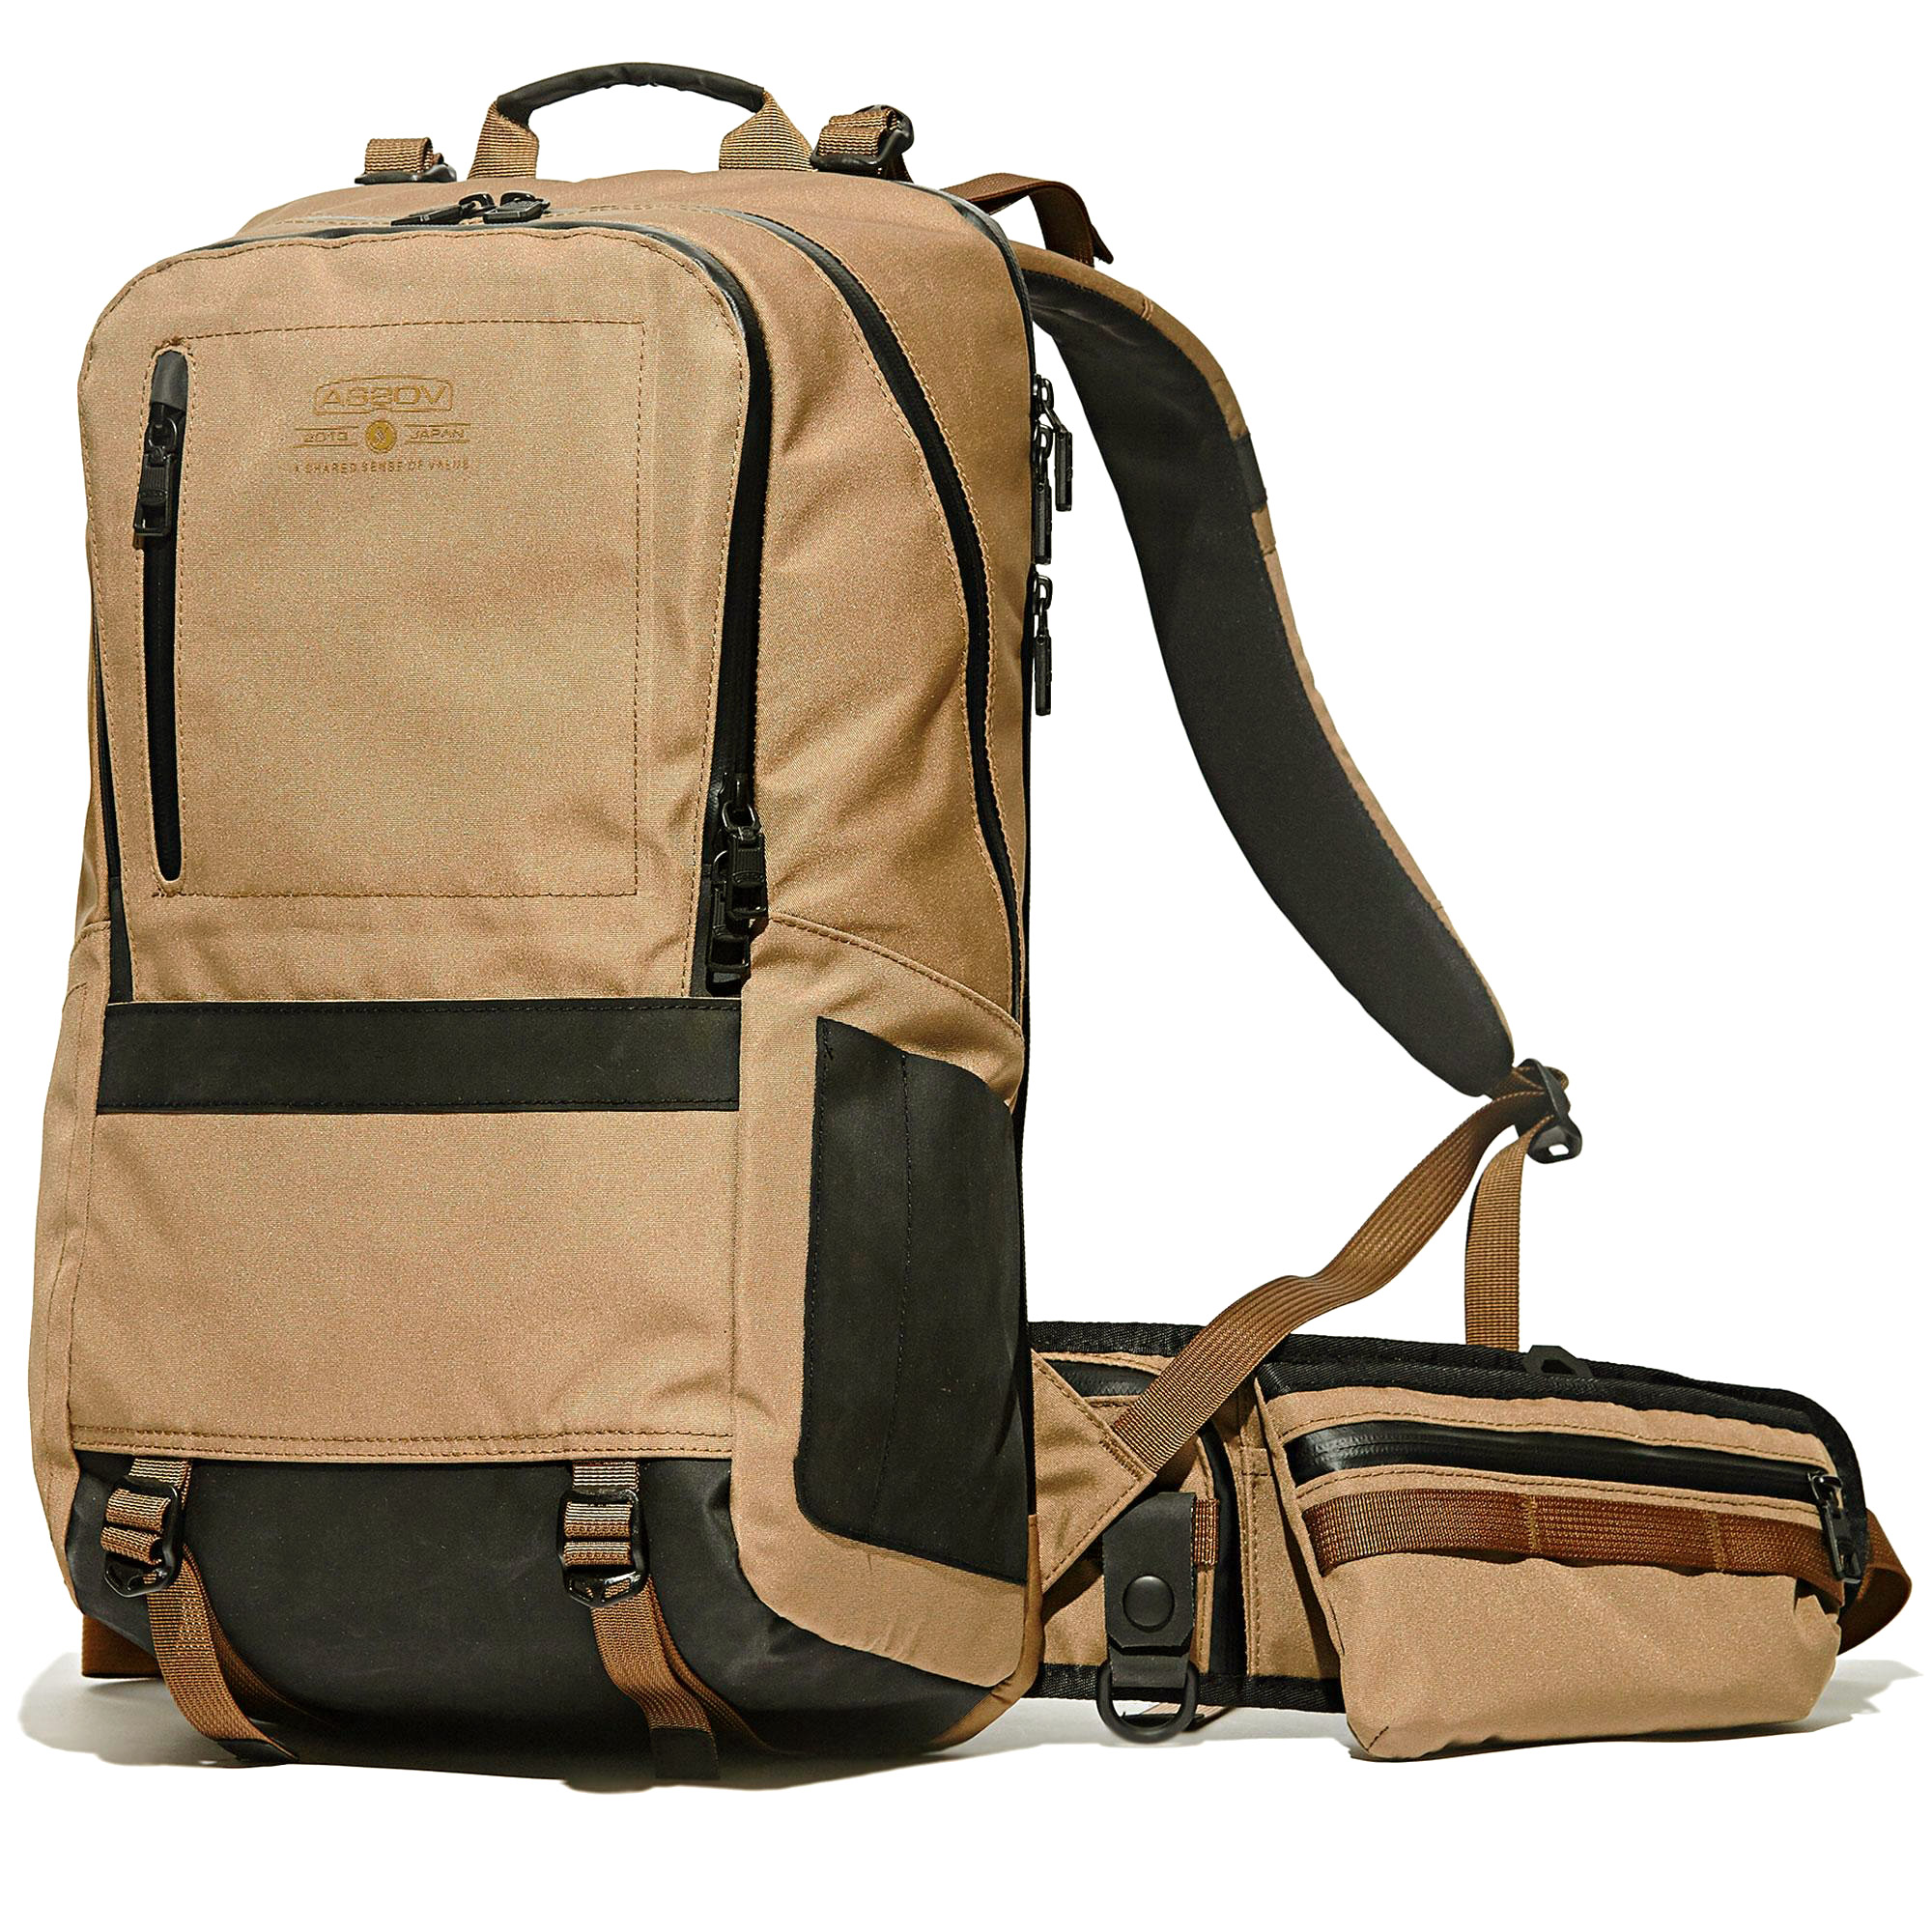 WATER PROOF CORDURA 305D DAY PACK